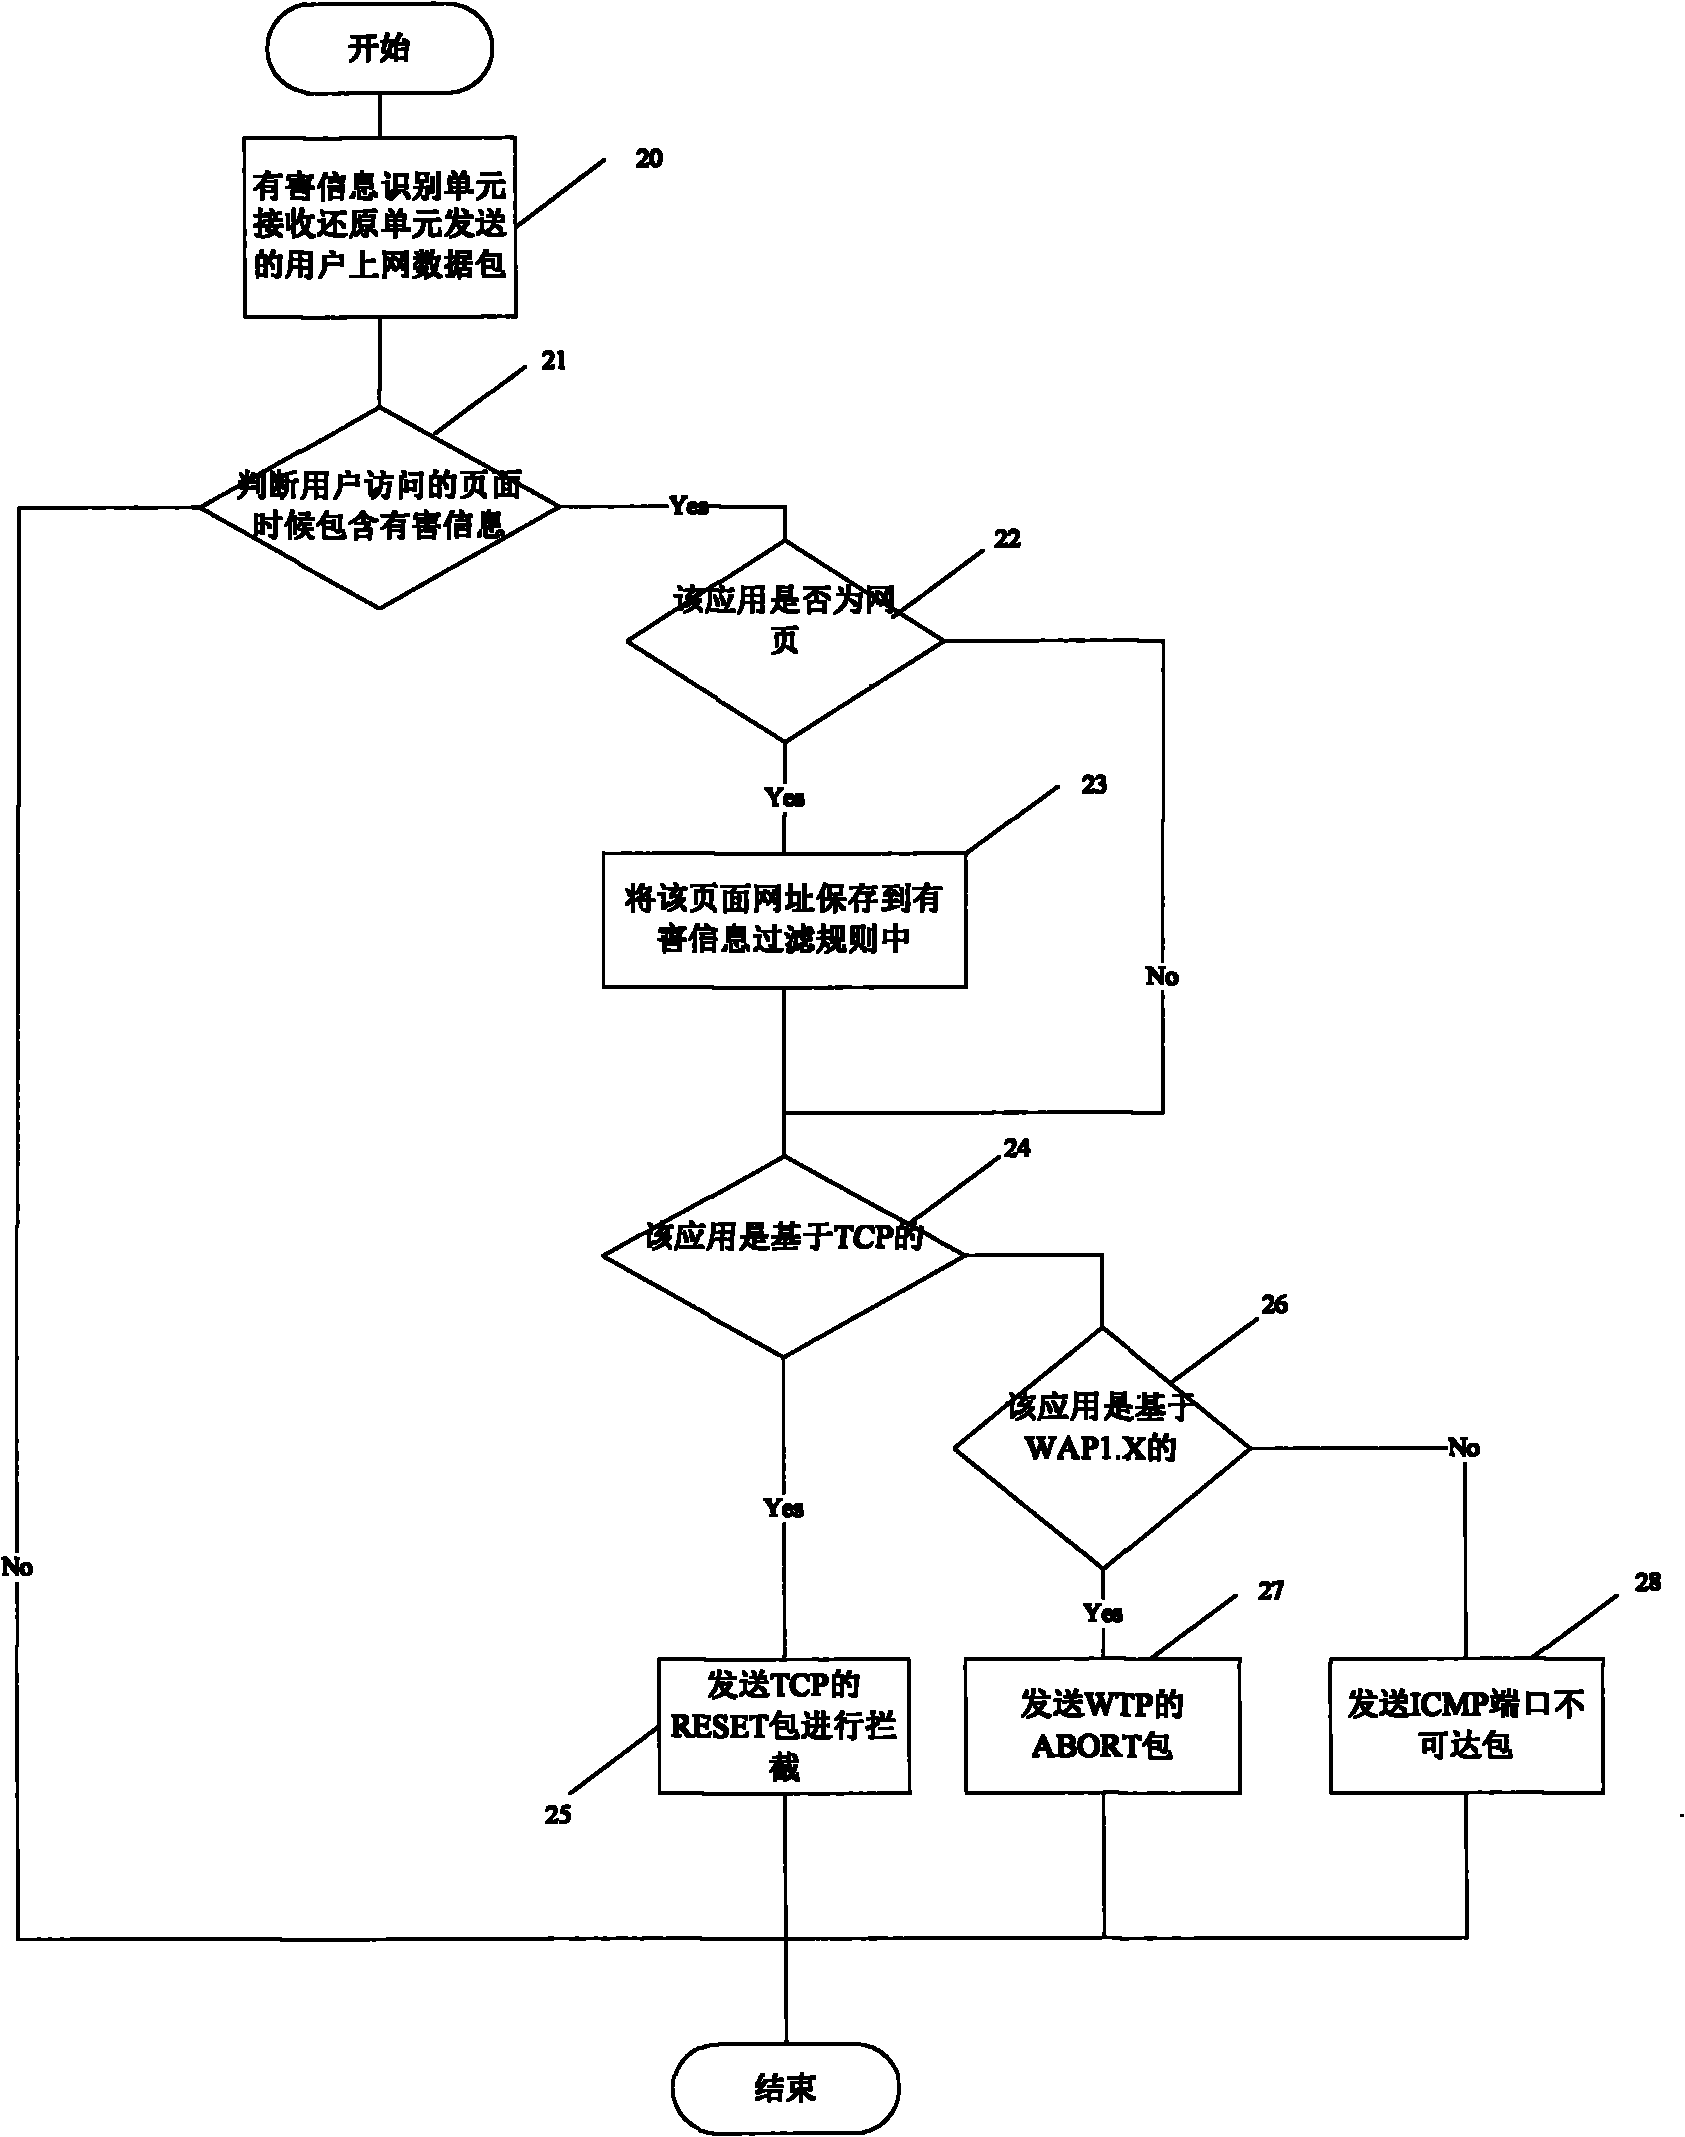 Harmful information filtration system based on mobile Internet and method thereof